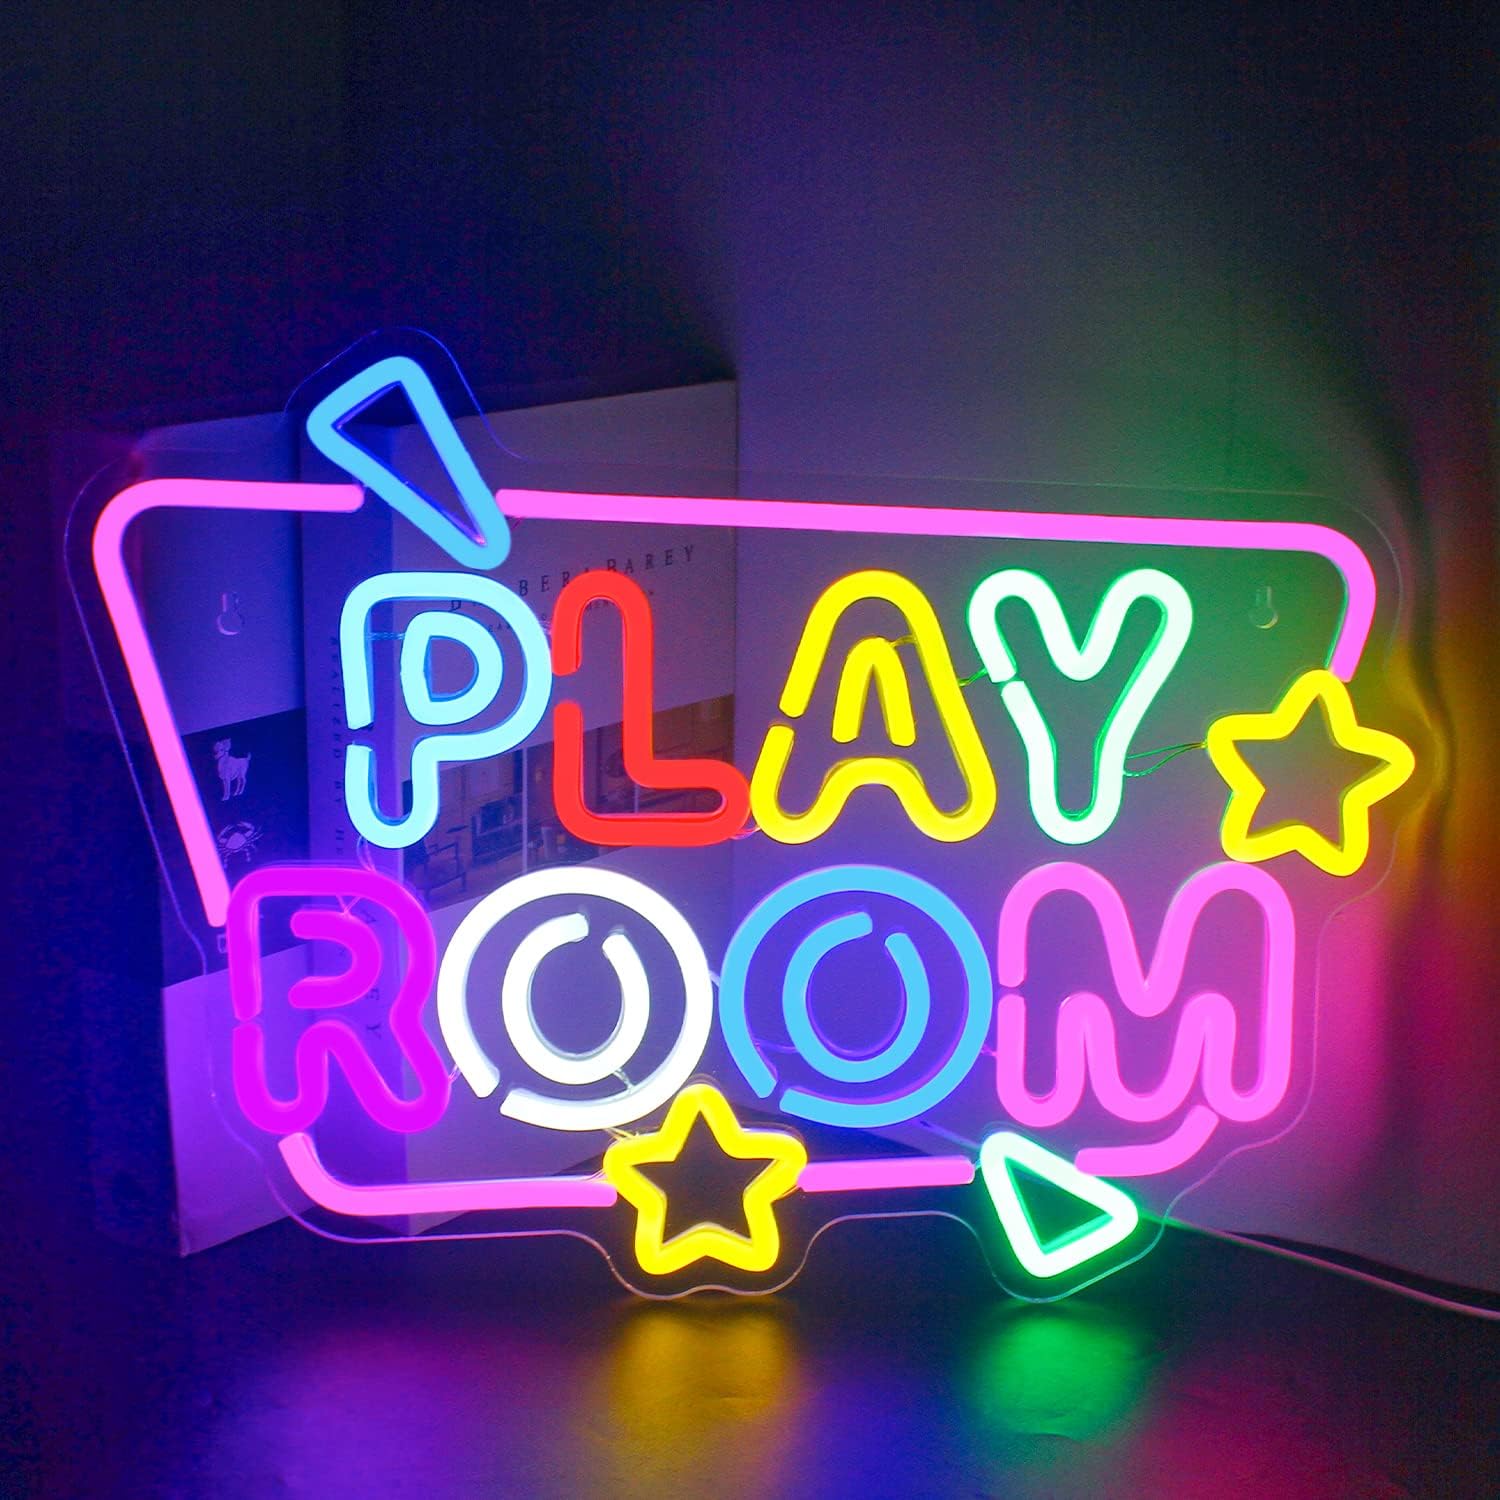 Let's Play Neon Sign